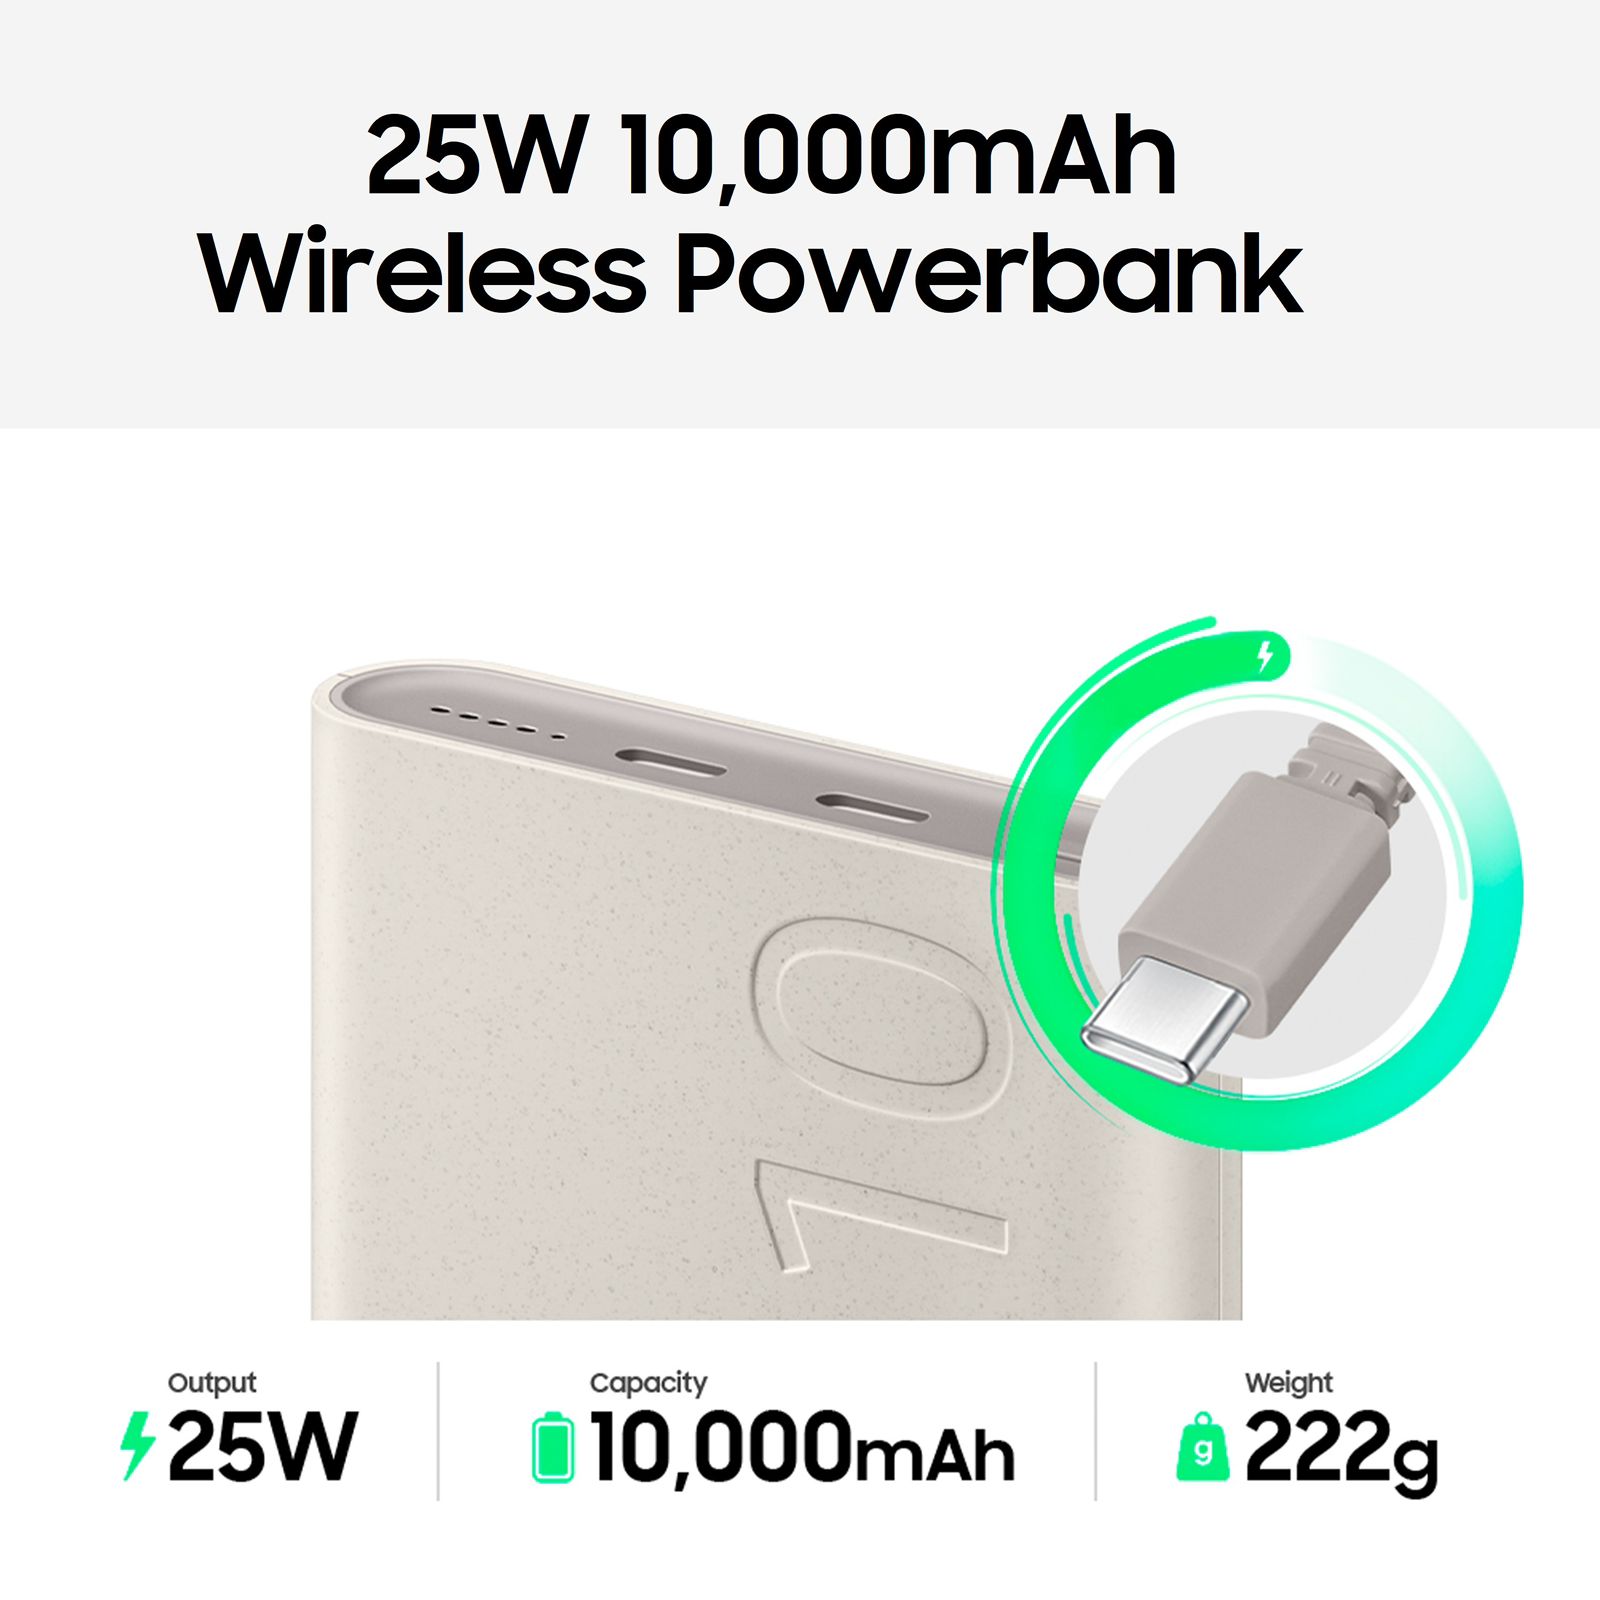 These newly launched power banks also feature fast charging capabilities